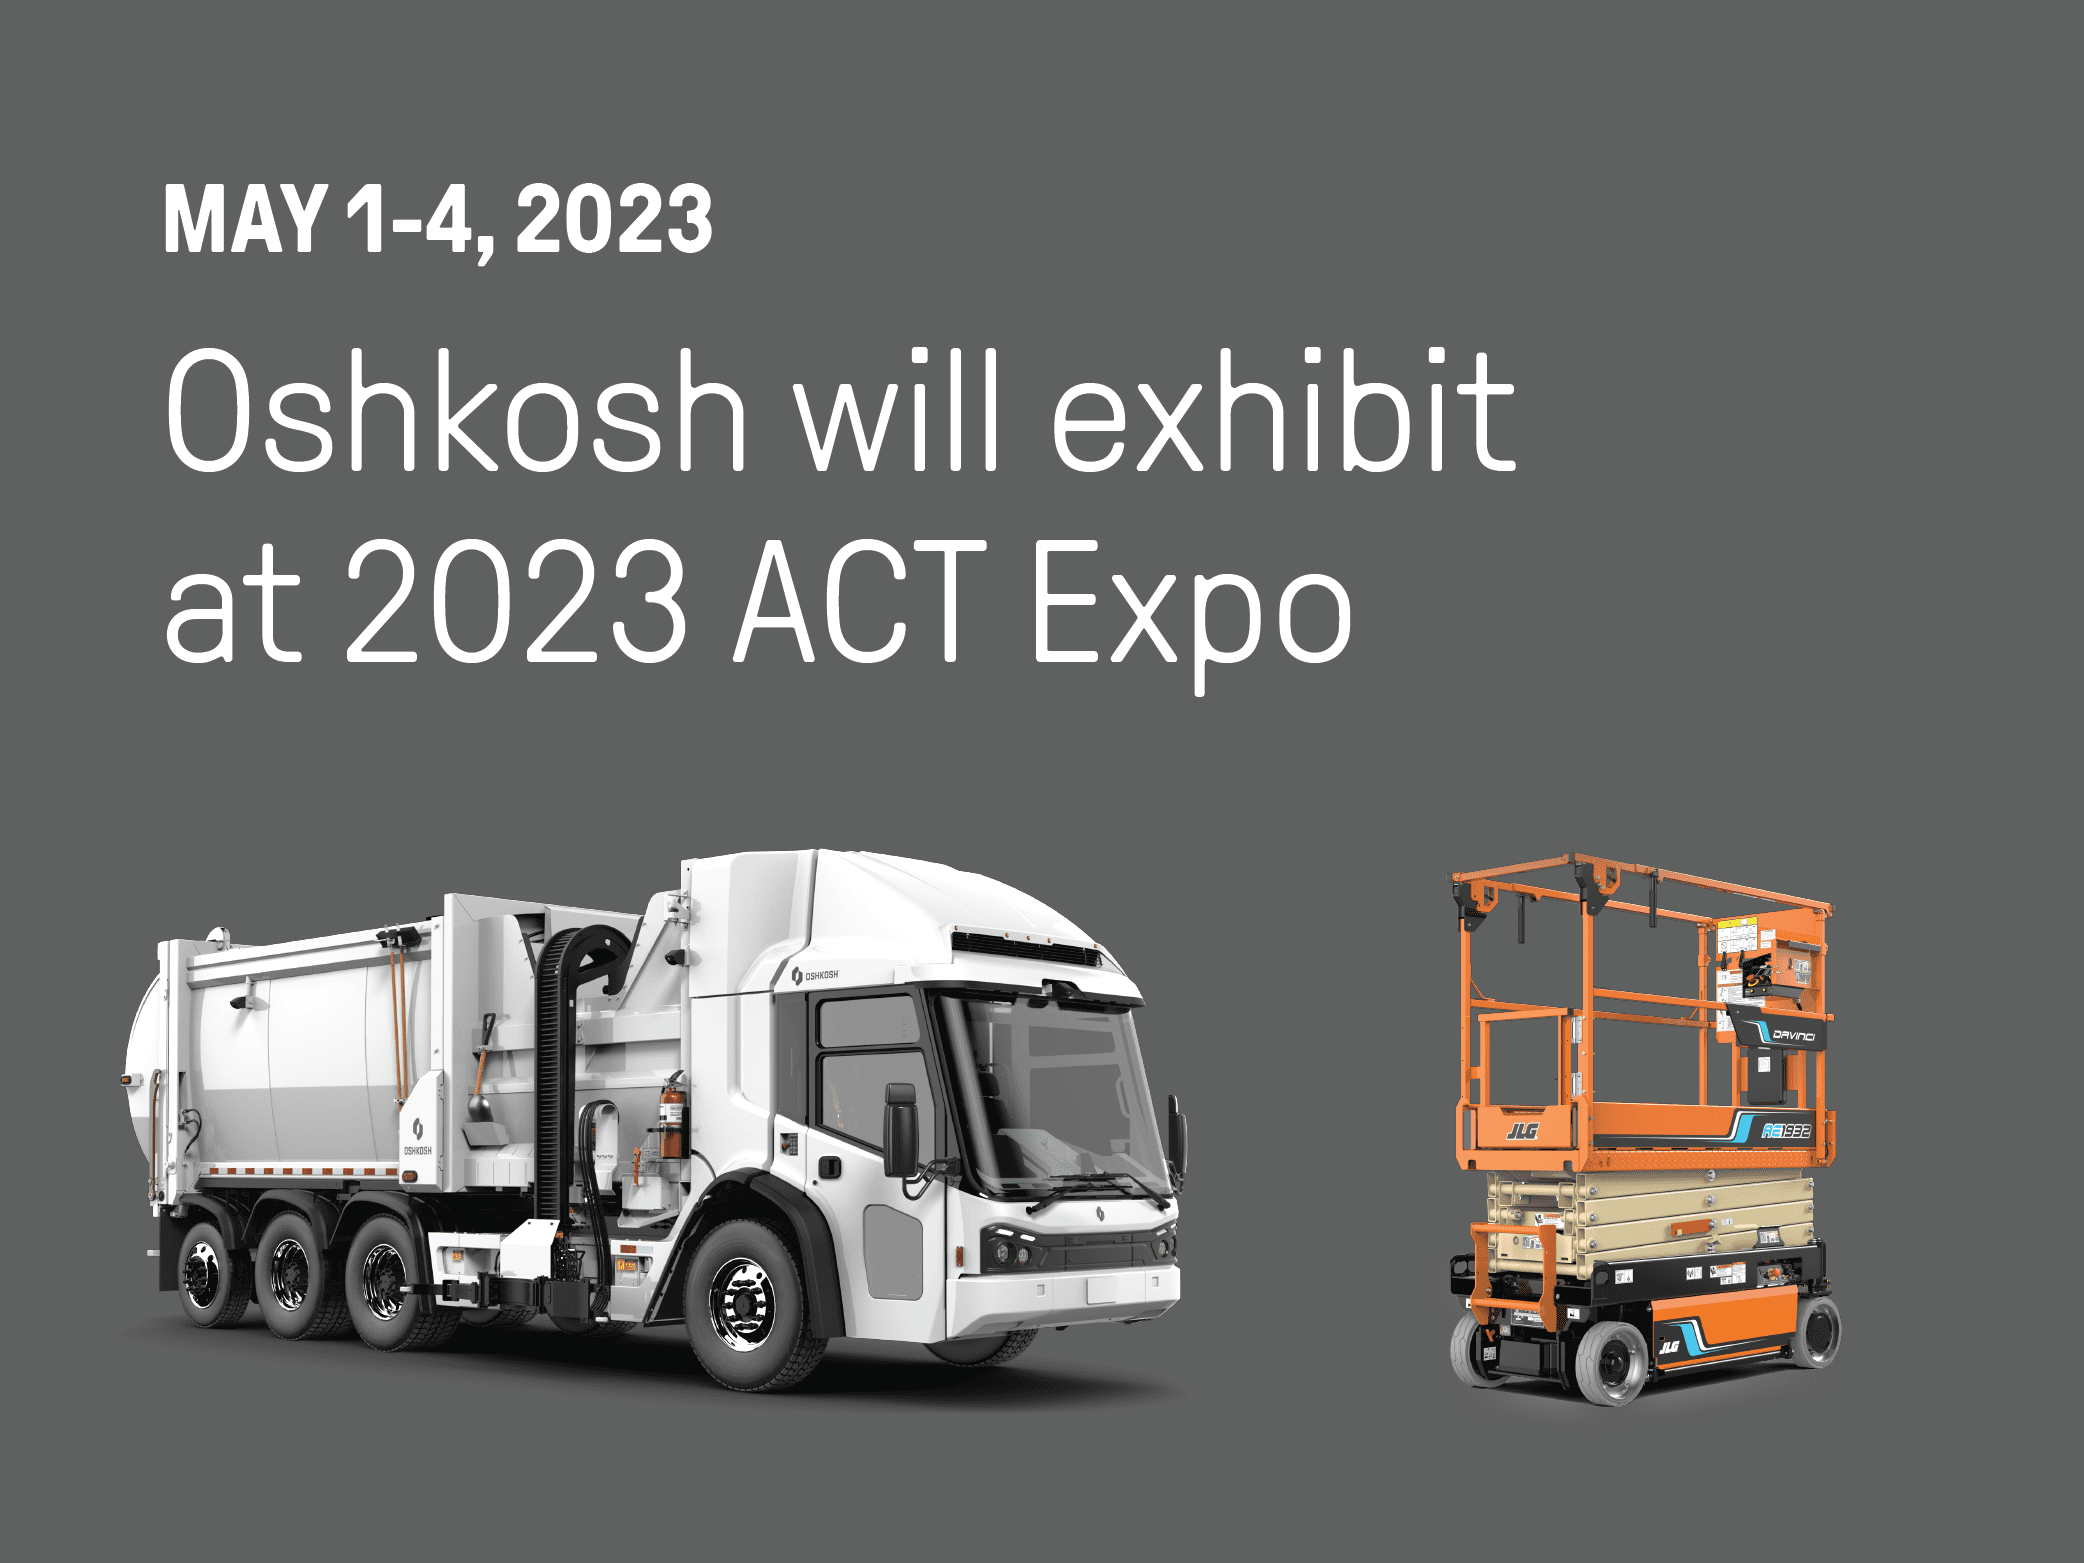 Oshkosh fully integrated electric refuse collection vehicle and DaVinci scissor lift on a grey background with white text